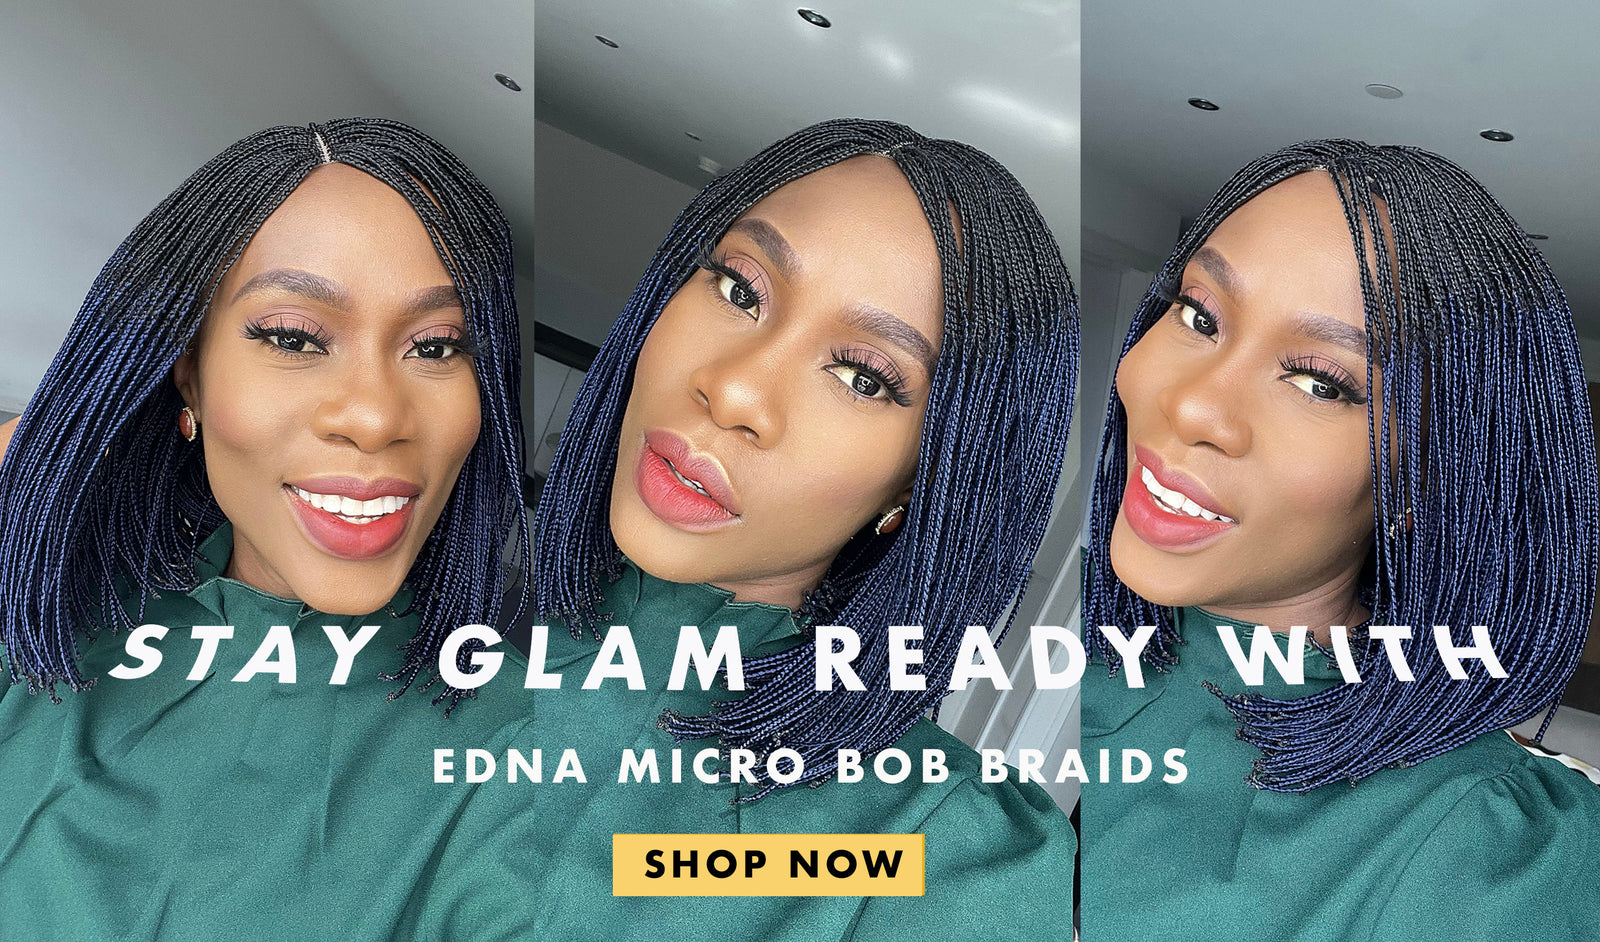 Exquisitely Custom Crafted Braided Wigs